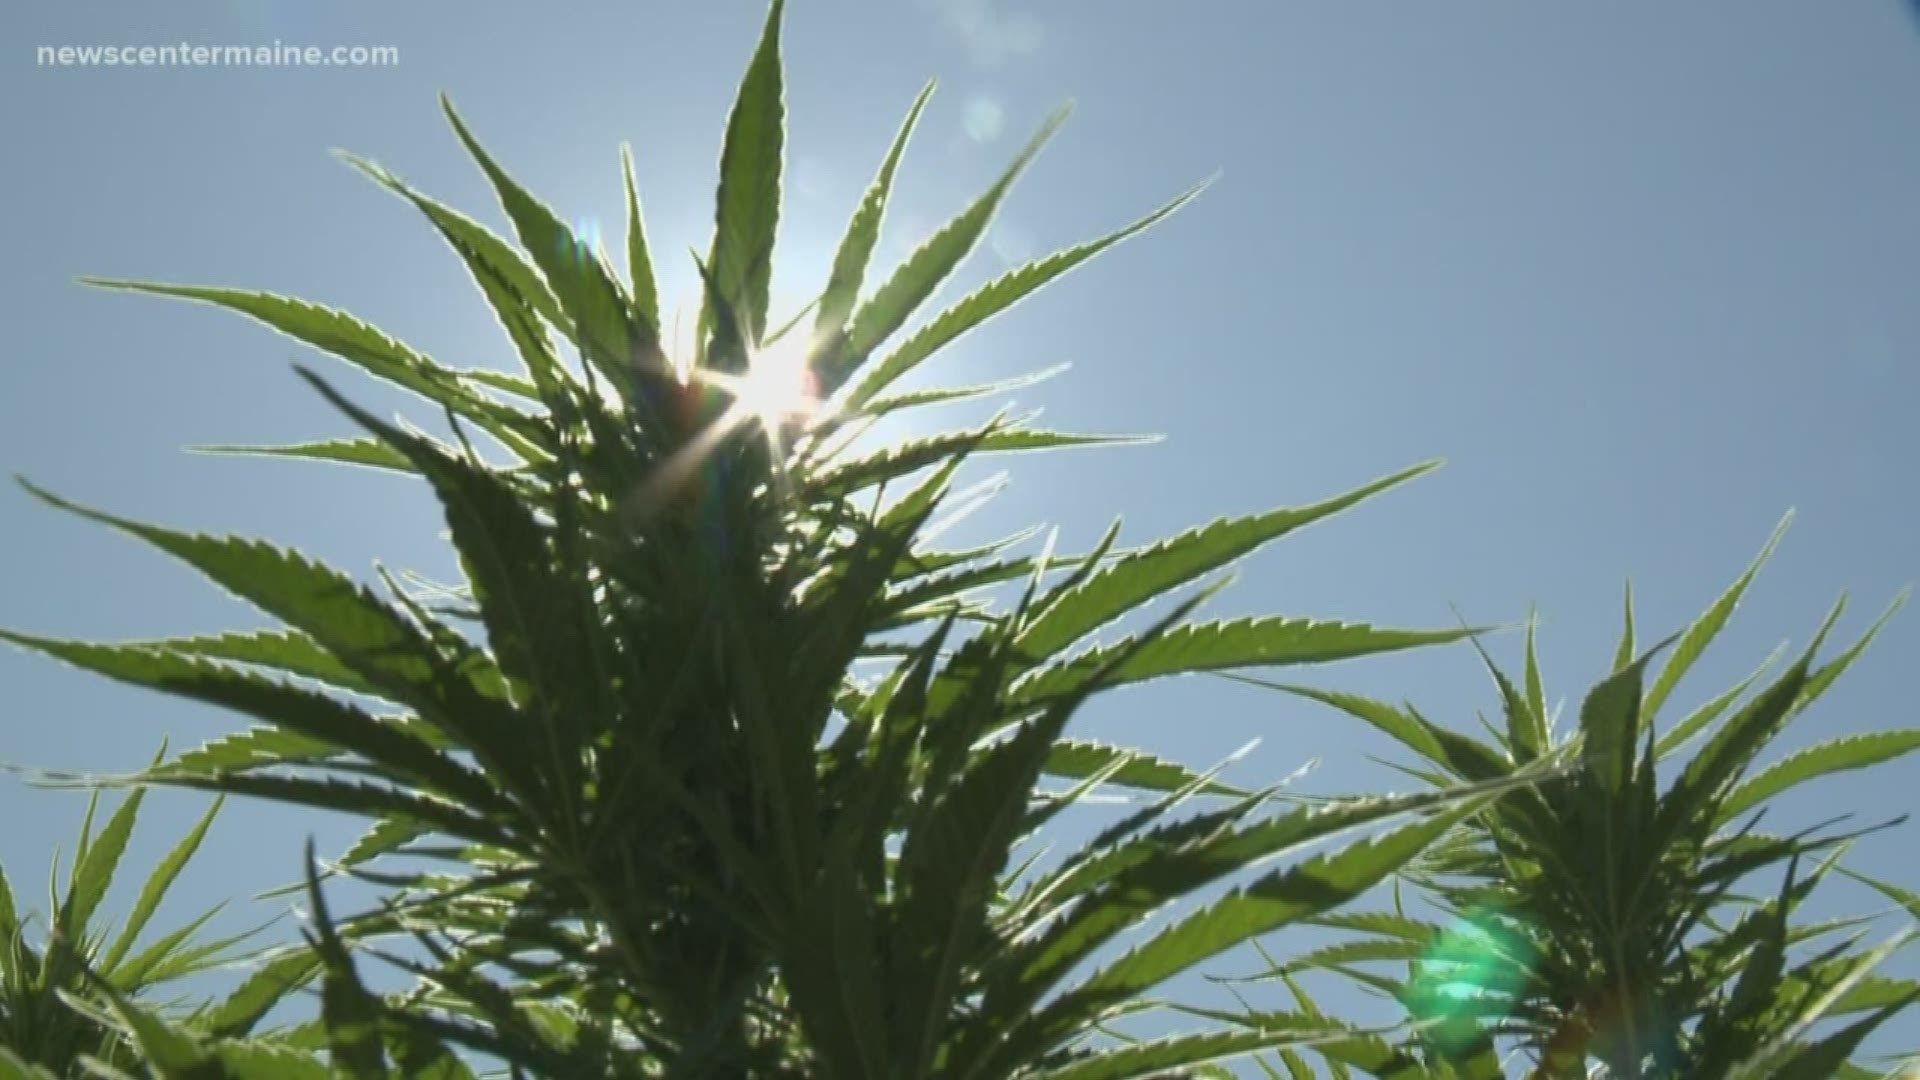 Maine hemp growers are concerned that new rules could hold back the growth of the industry.